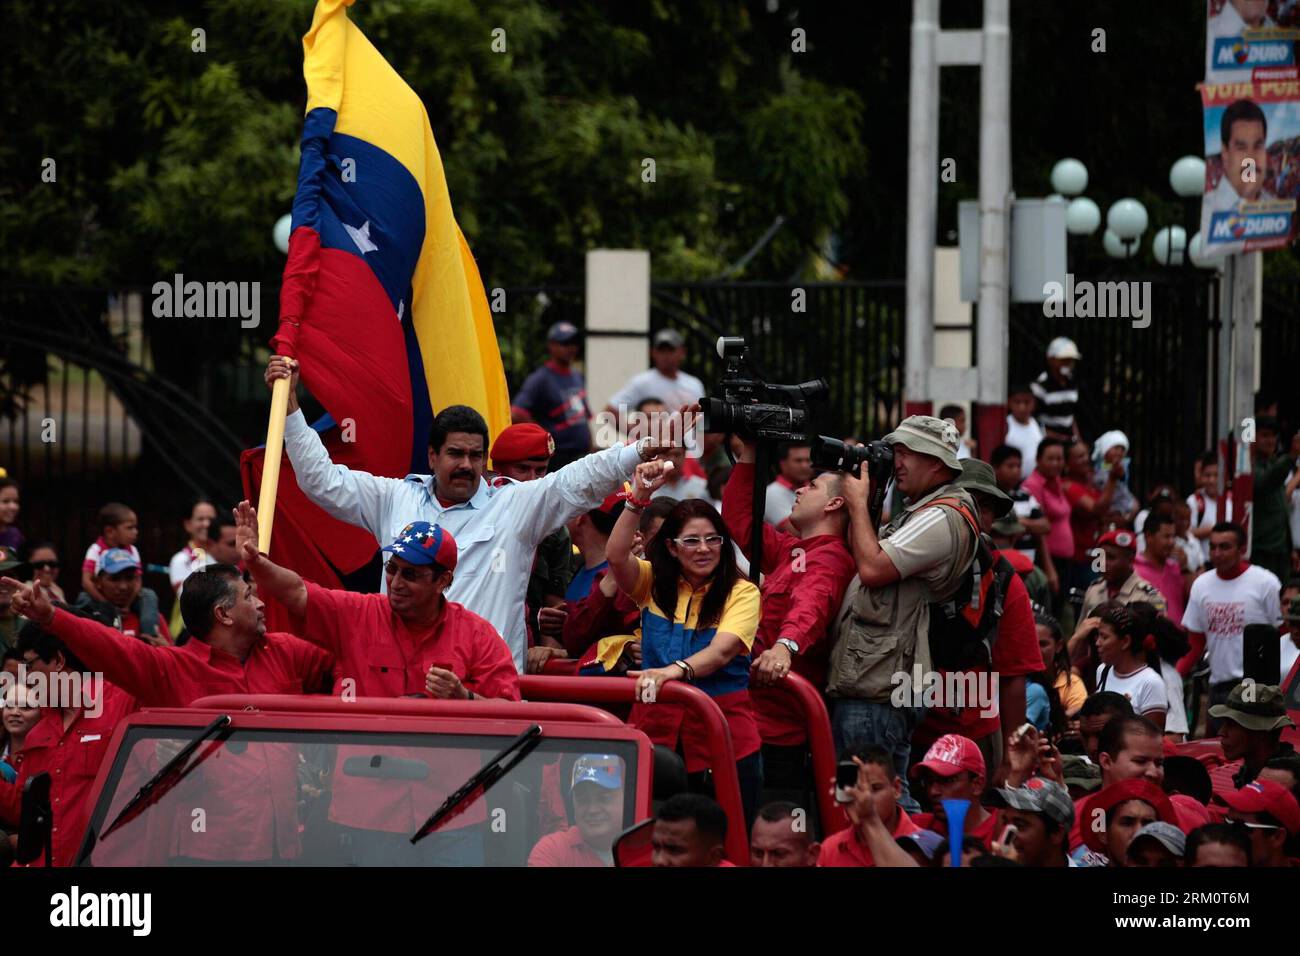 Bildnummer: 59468339  Datum: 02.04.2013  Copyright: imago/Xinhua (130403) -- BARINAS, April 3, 2013 (Xinhua) -- Photo provided by Command Campaign Hugo Chavez shows Venezuela s Acting President and presidential candidate Nicolas Maduro waving to supporters before a rally in Barinas, Venezuela, April 2, 2013. The electoral campaign in Venezuela, heading for the upcoming presidential elections on April 14, officially started on Tuesday and will run for 10 days, during which the candidates will present their proposals to the entire country. (Xinhua/Command Campaign Hugo Chavez) (djj) VENEZUELA-PR Stock Photo